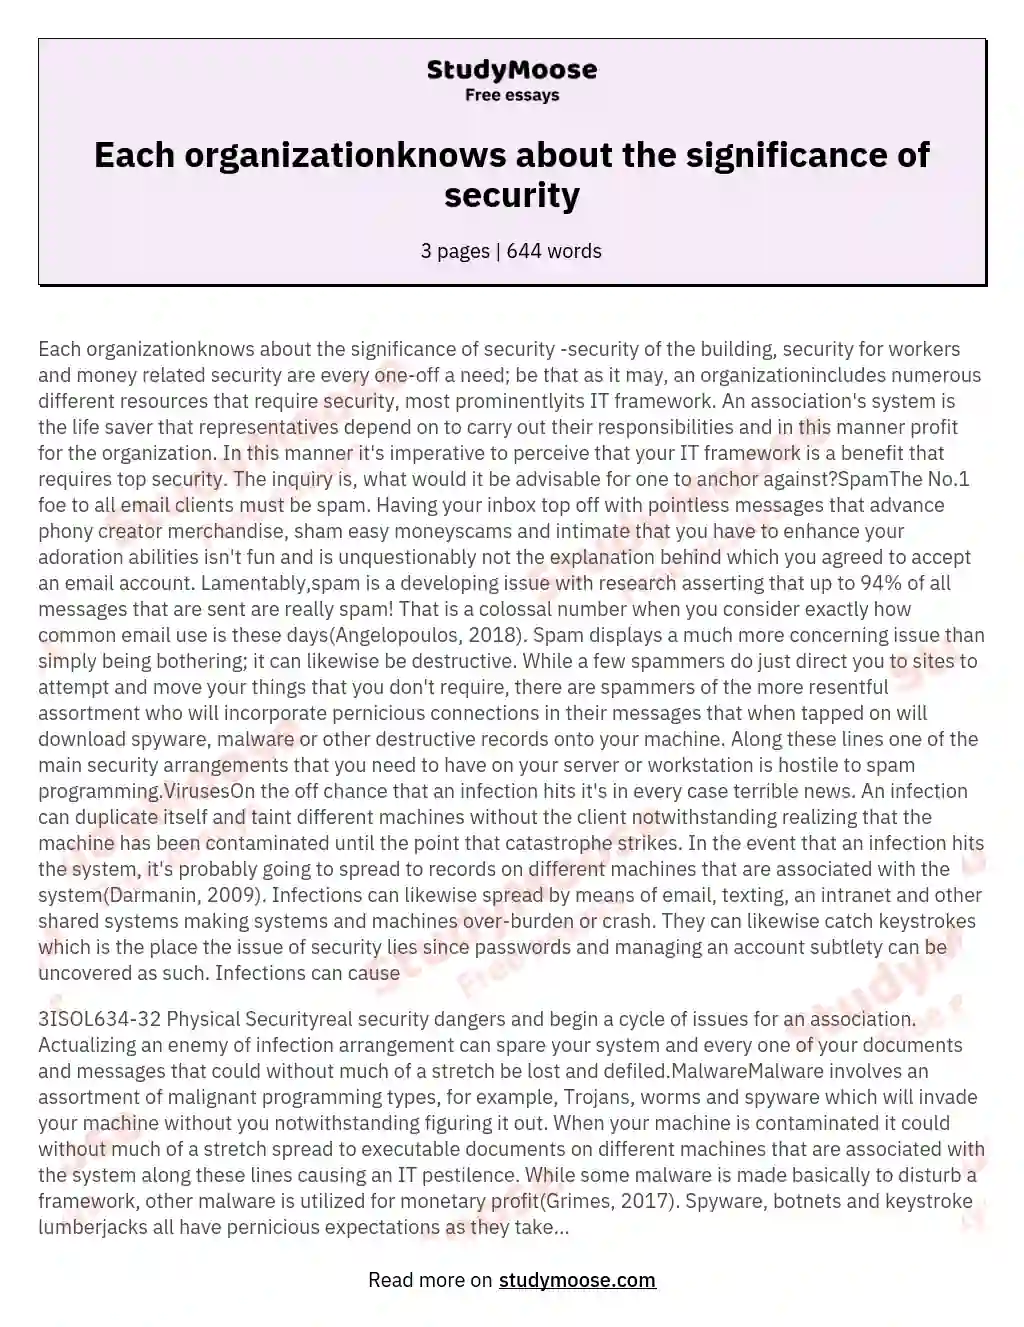 Each organizationknows about the significance of security essay